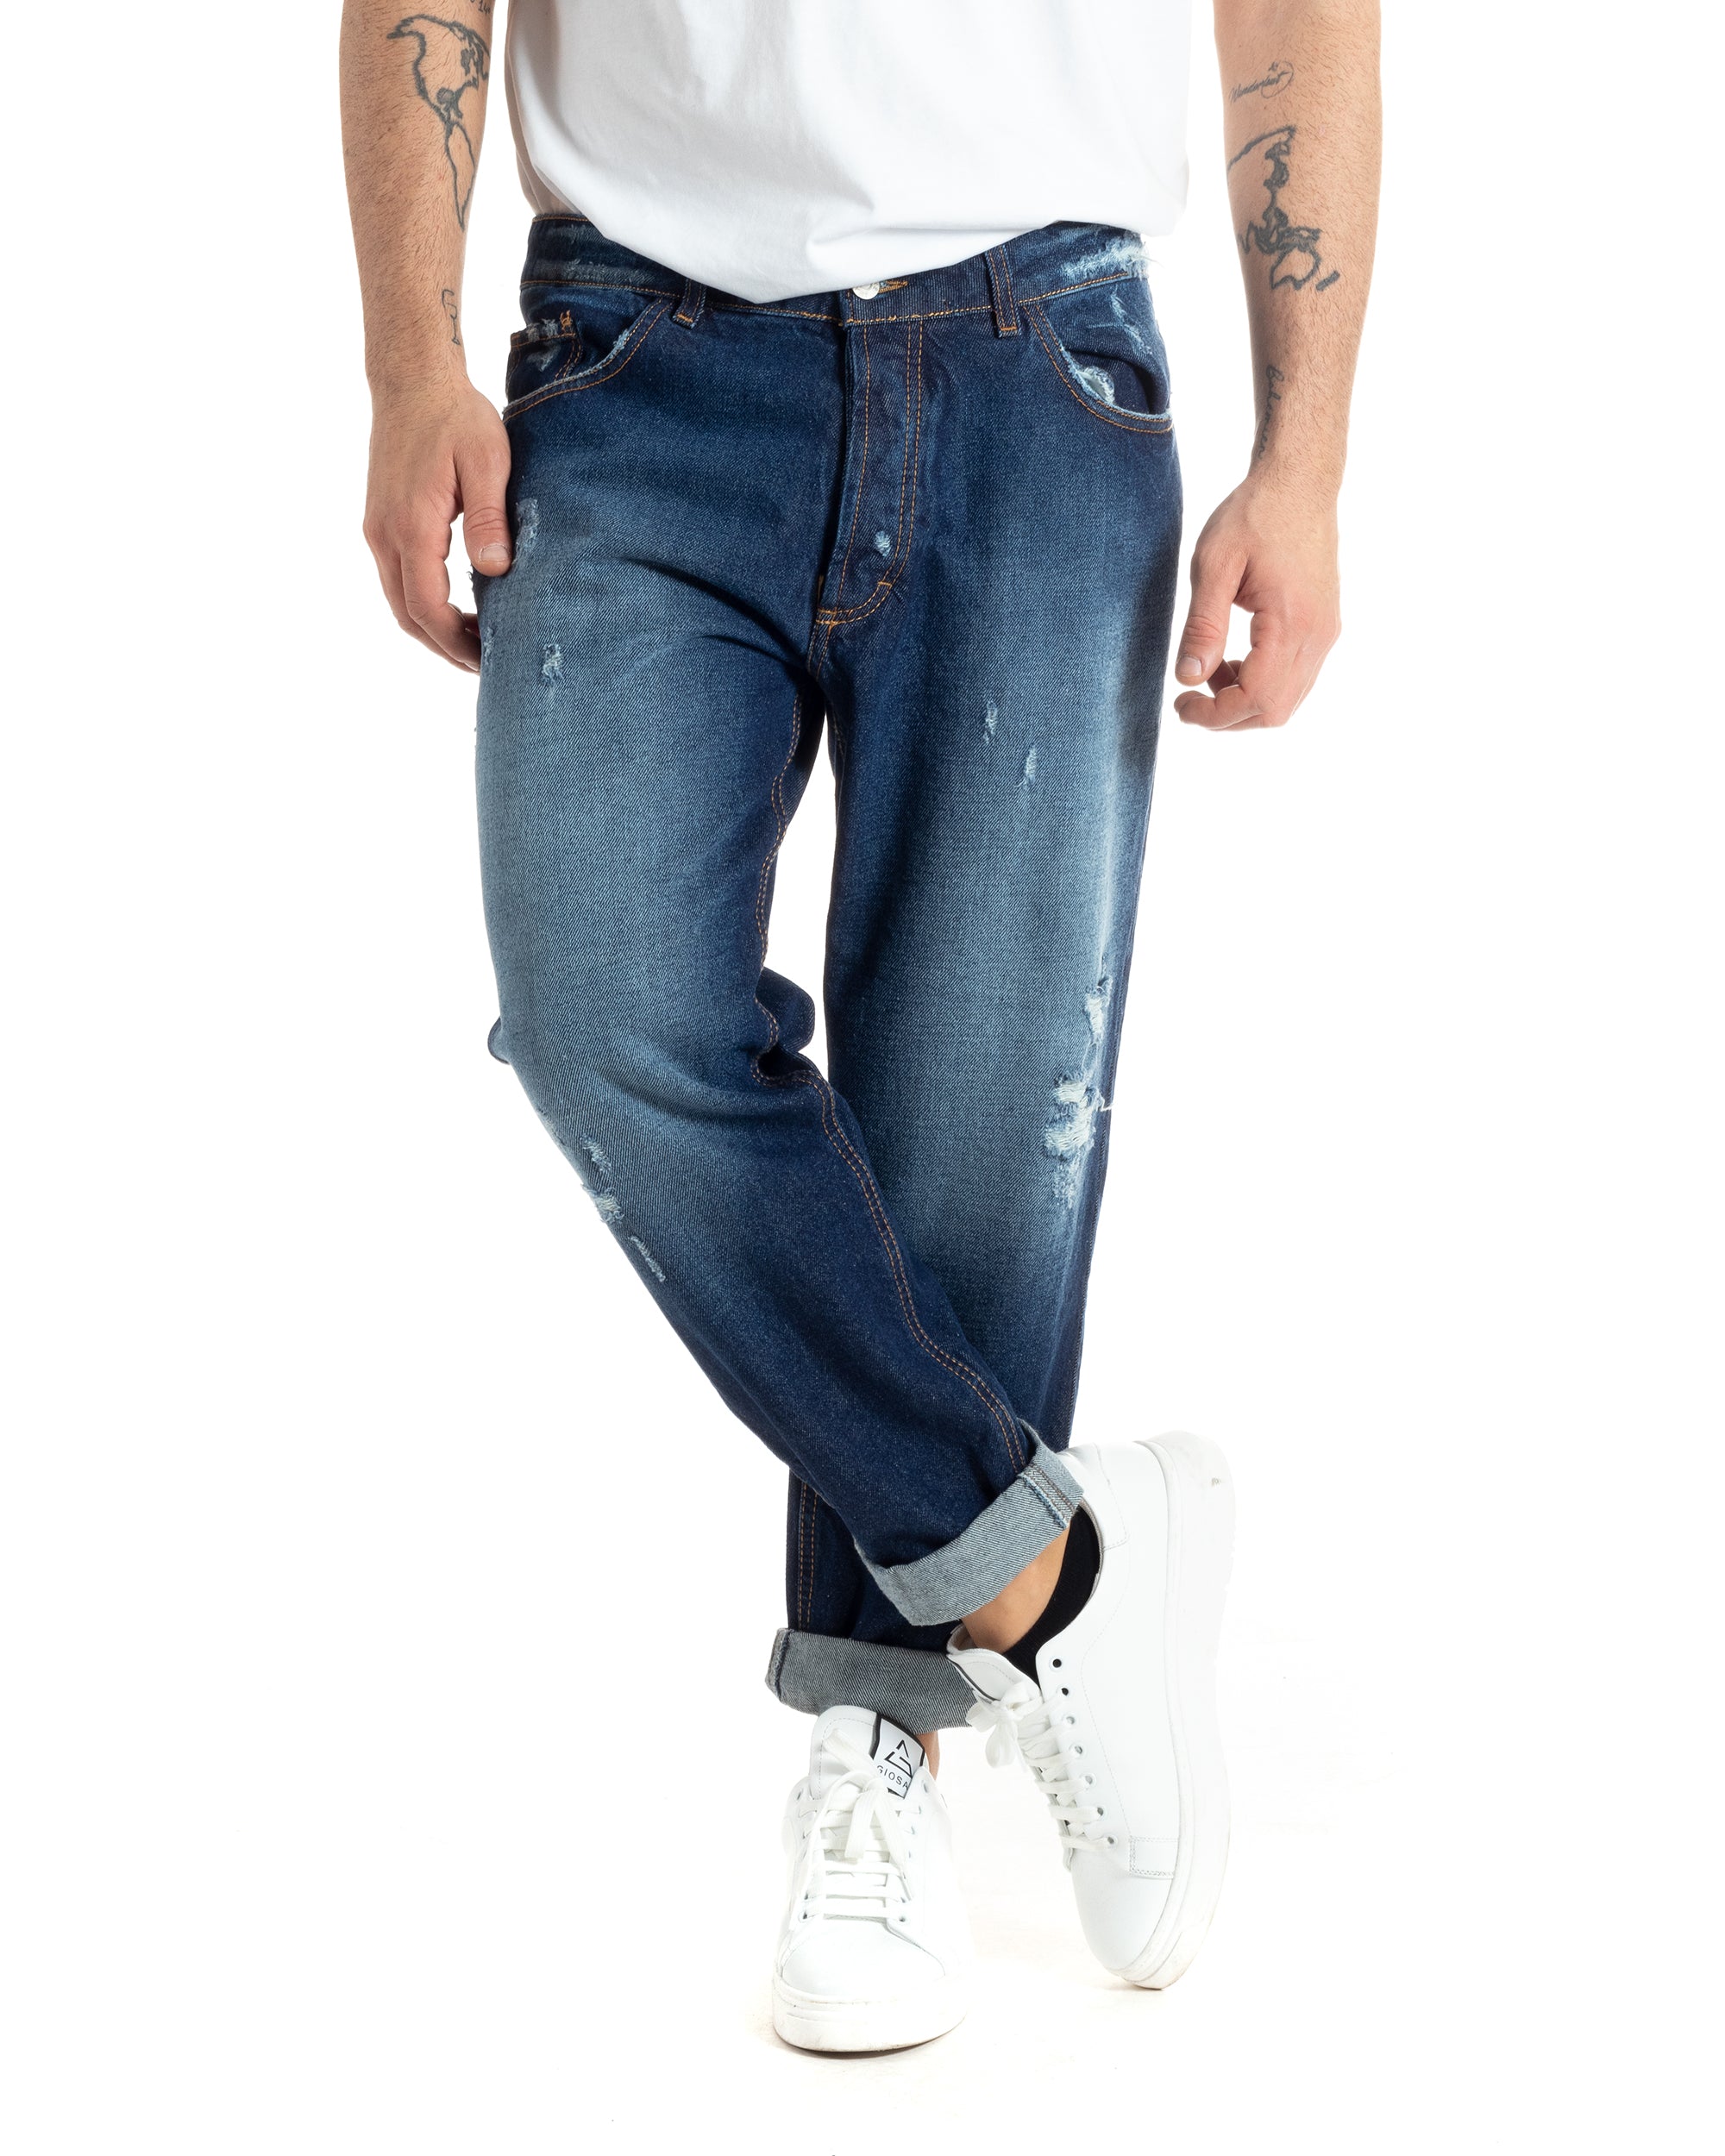 Pantaloni Jeans Uomo Loose Fit Denim Scuro Con Rotture Stonewashed GIOSAL-JS1001A